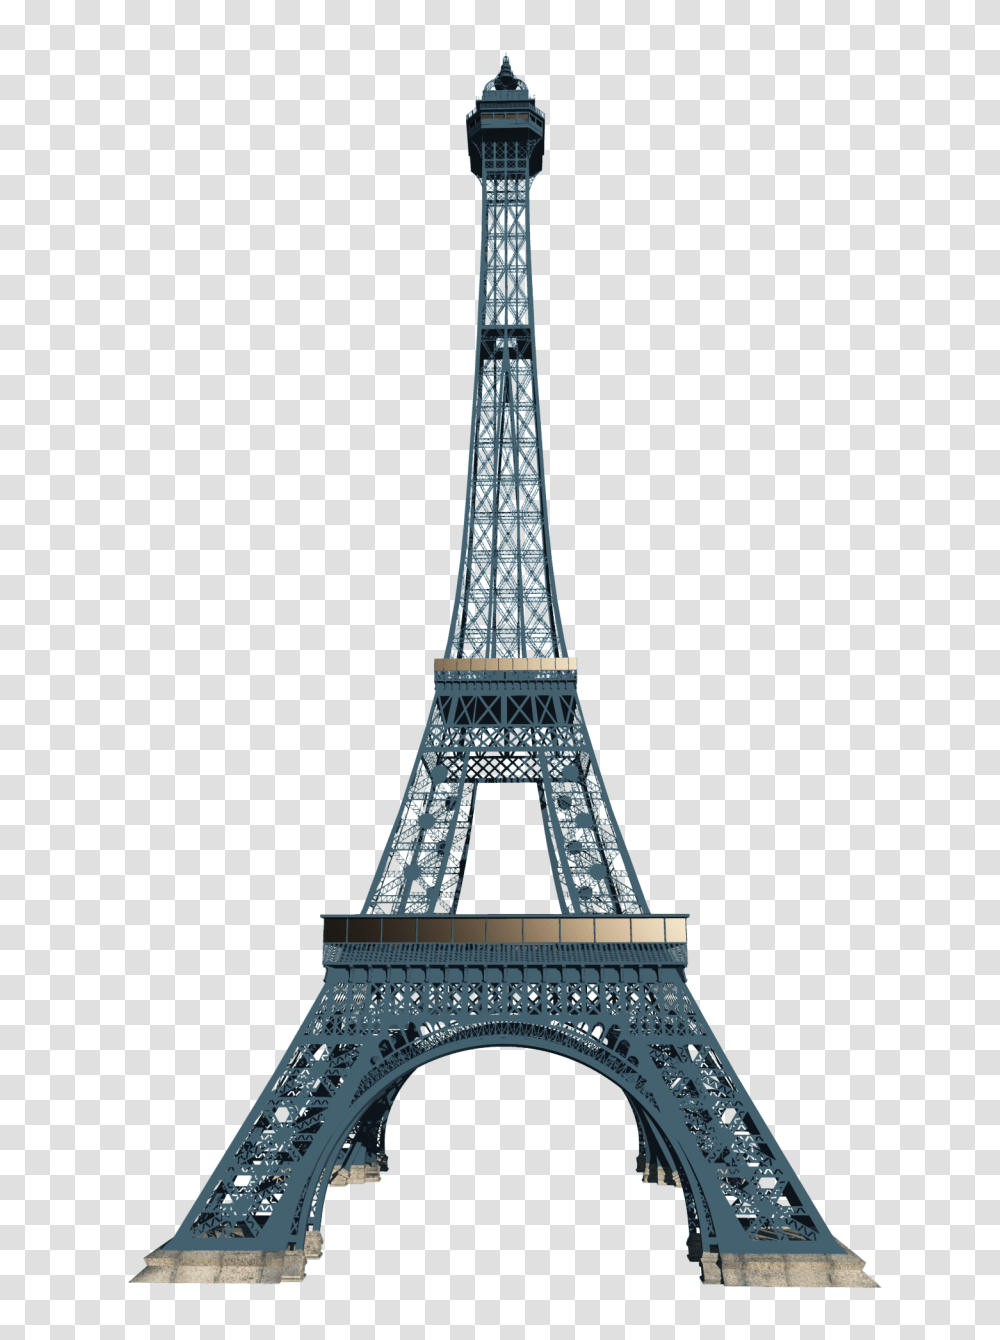 Paris And Vectors For Free Download Eiffel Tower, Architecture, Building, Spire, Steeple Transparent Png